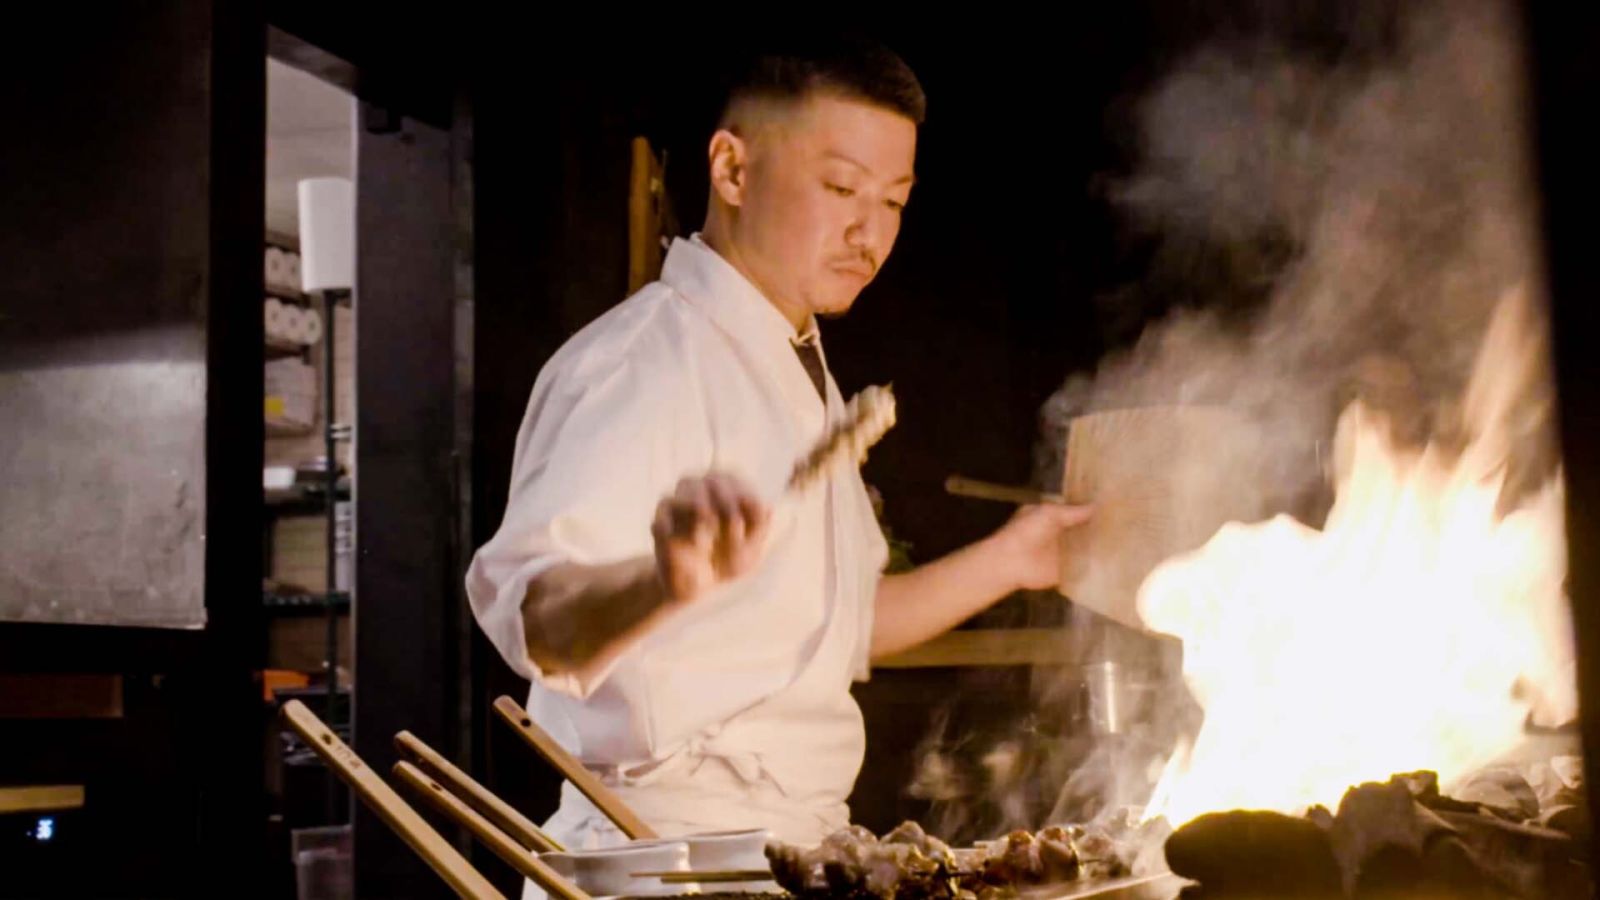 14 Seats, 16 Courses, 1 Chef: A Day With The Yakitori Master at Kono